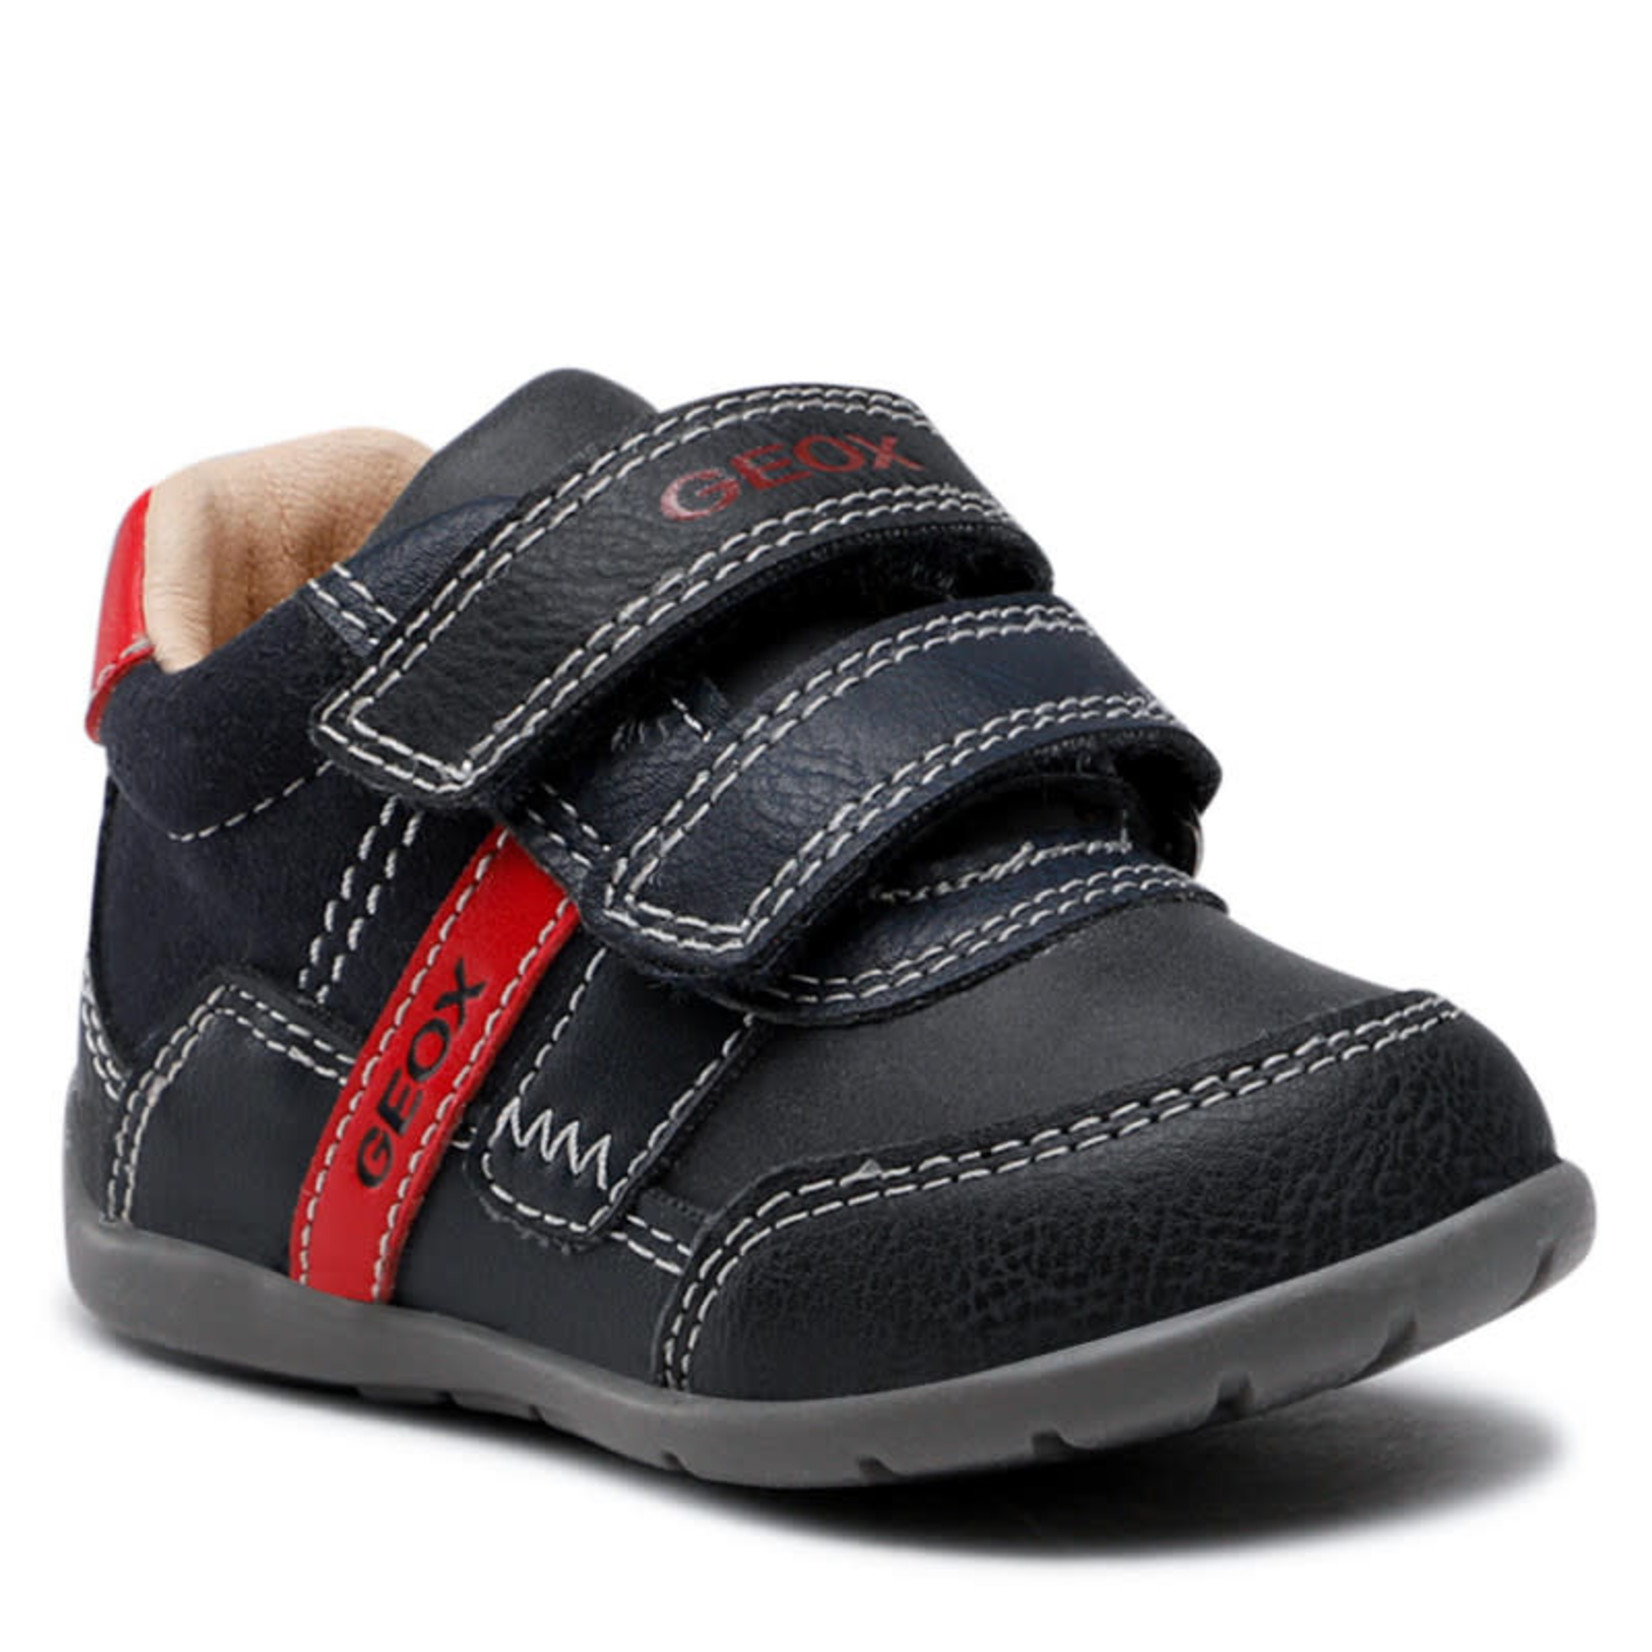 Geox GEOX - Chaussures de cuir synthétique 'Elthan - Marine / Rouge'